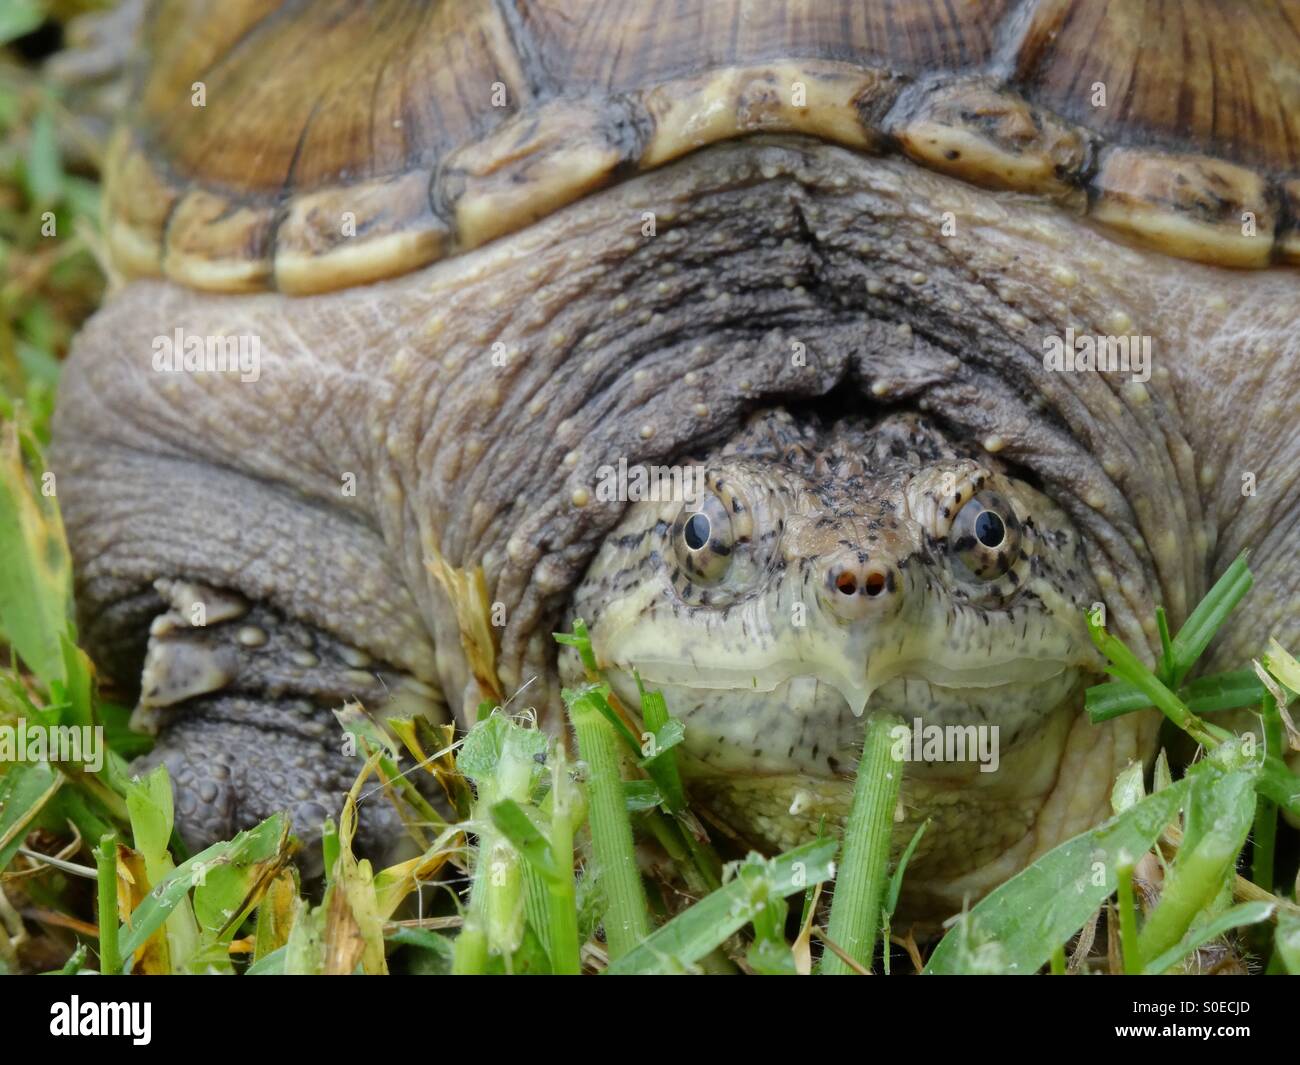 Alligator snapping turtle front Stock Photo